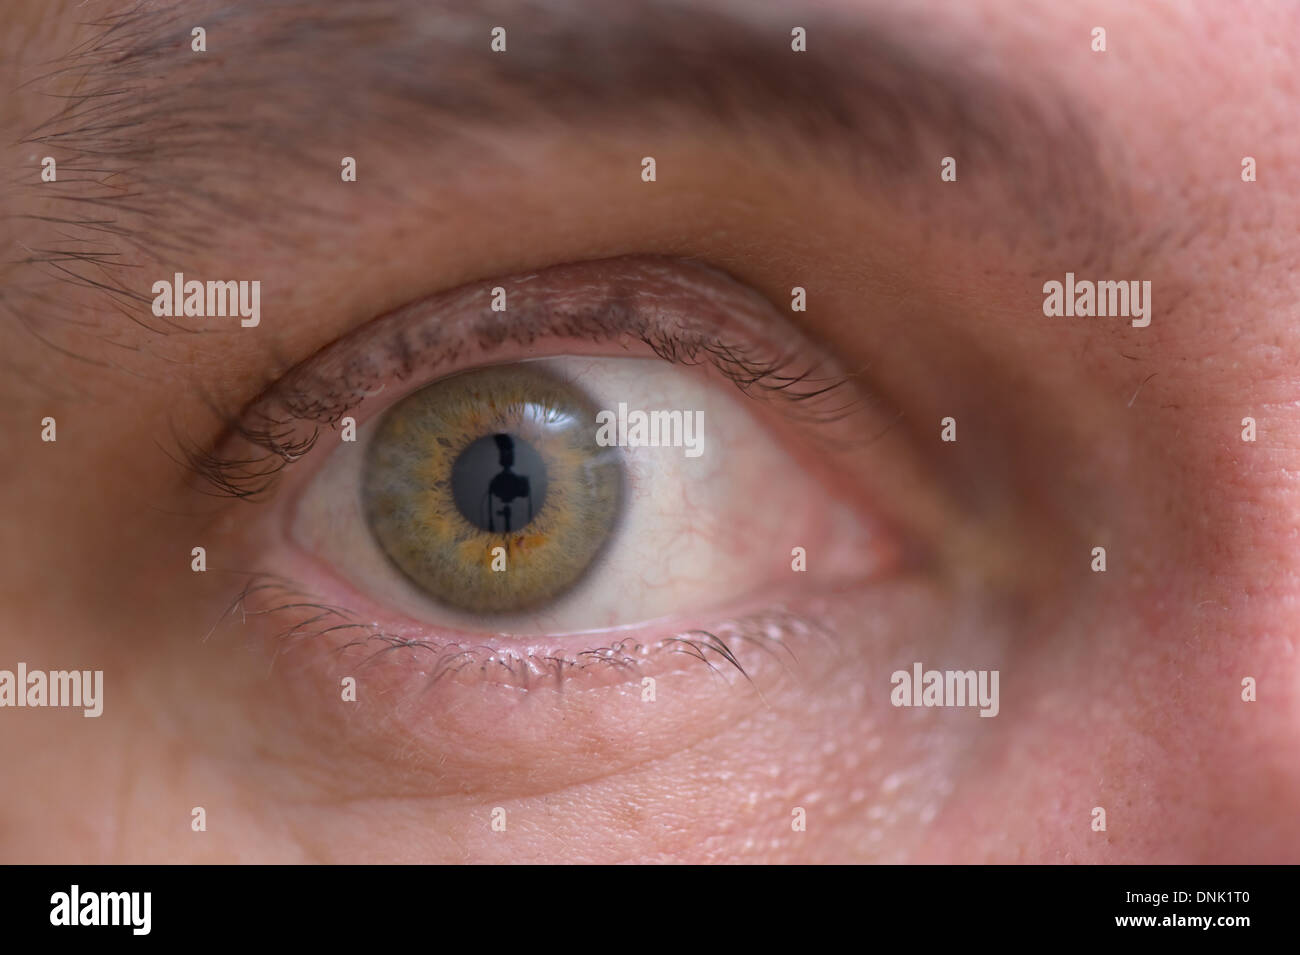 Close up of eye with reflection of camera on retina Stock Photo